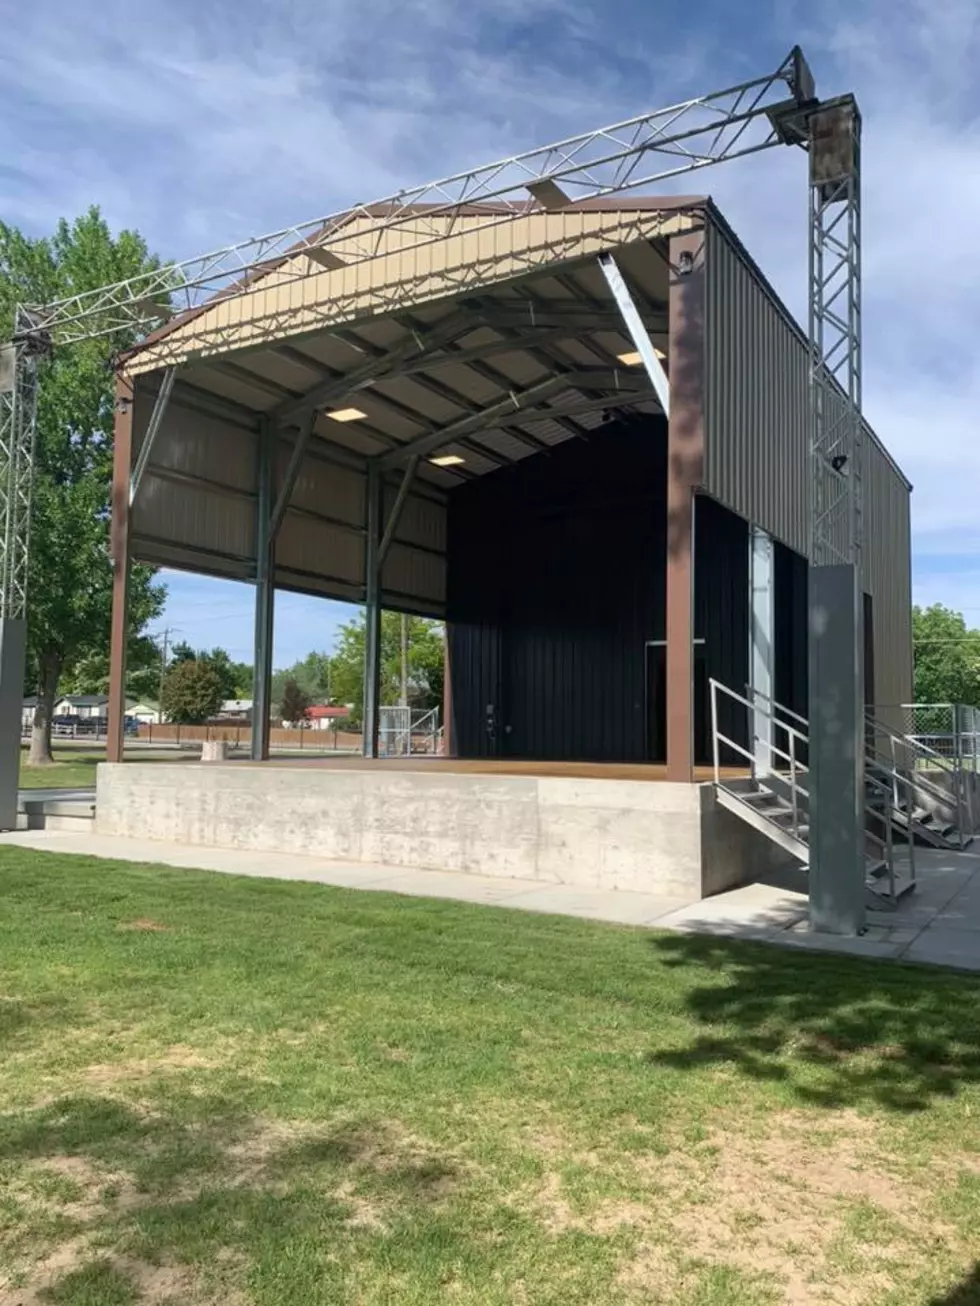 New Stage Complete At Twin Falls County Fairgrounds